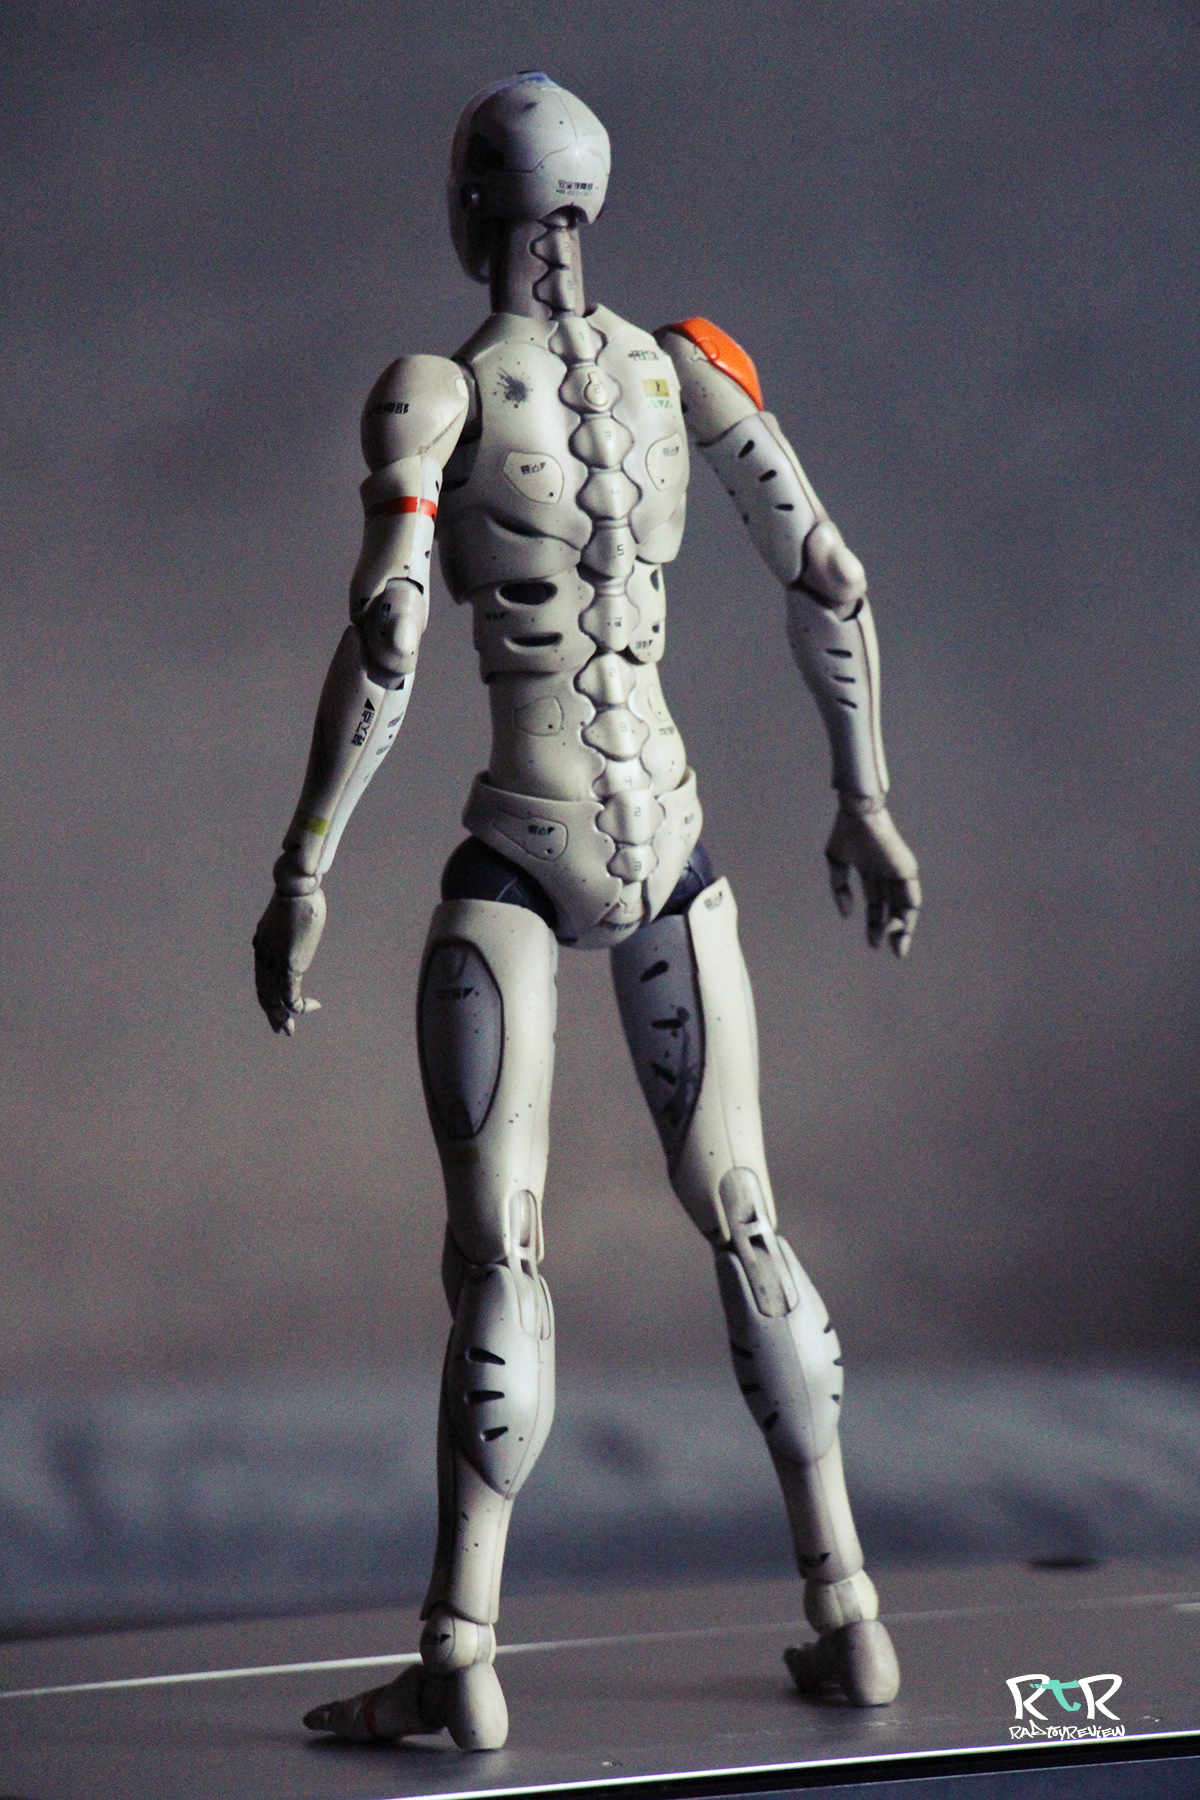 most articulated action figure